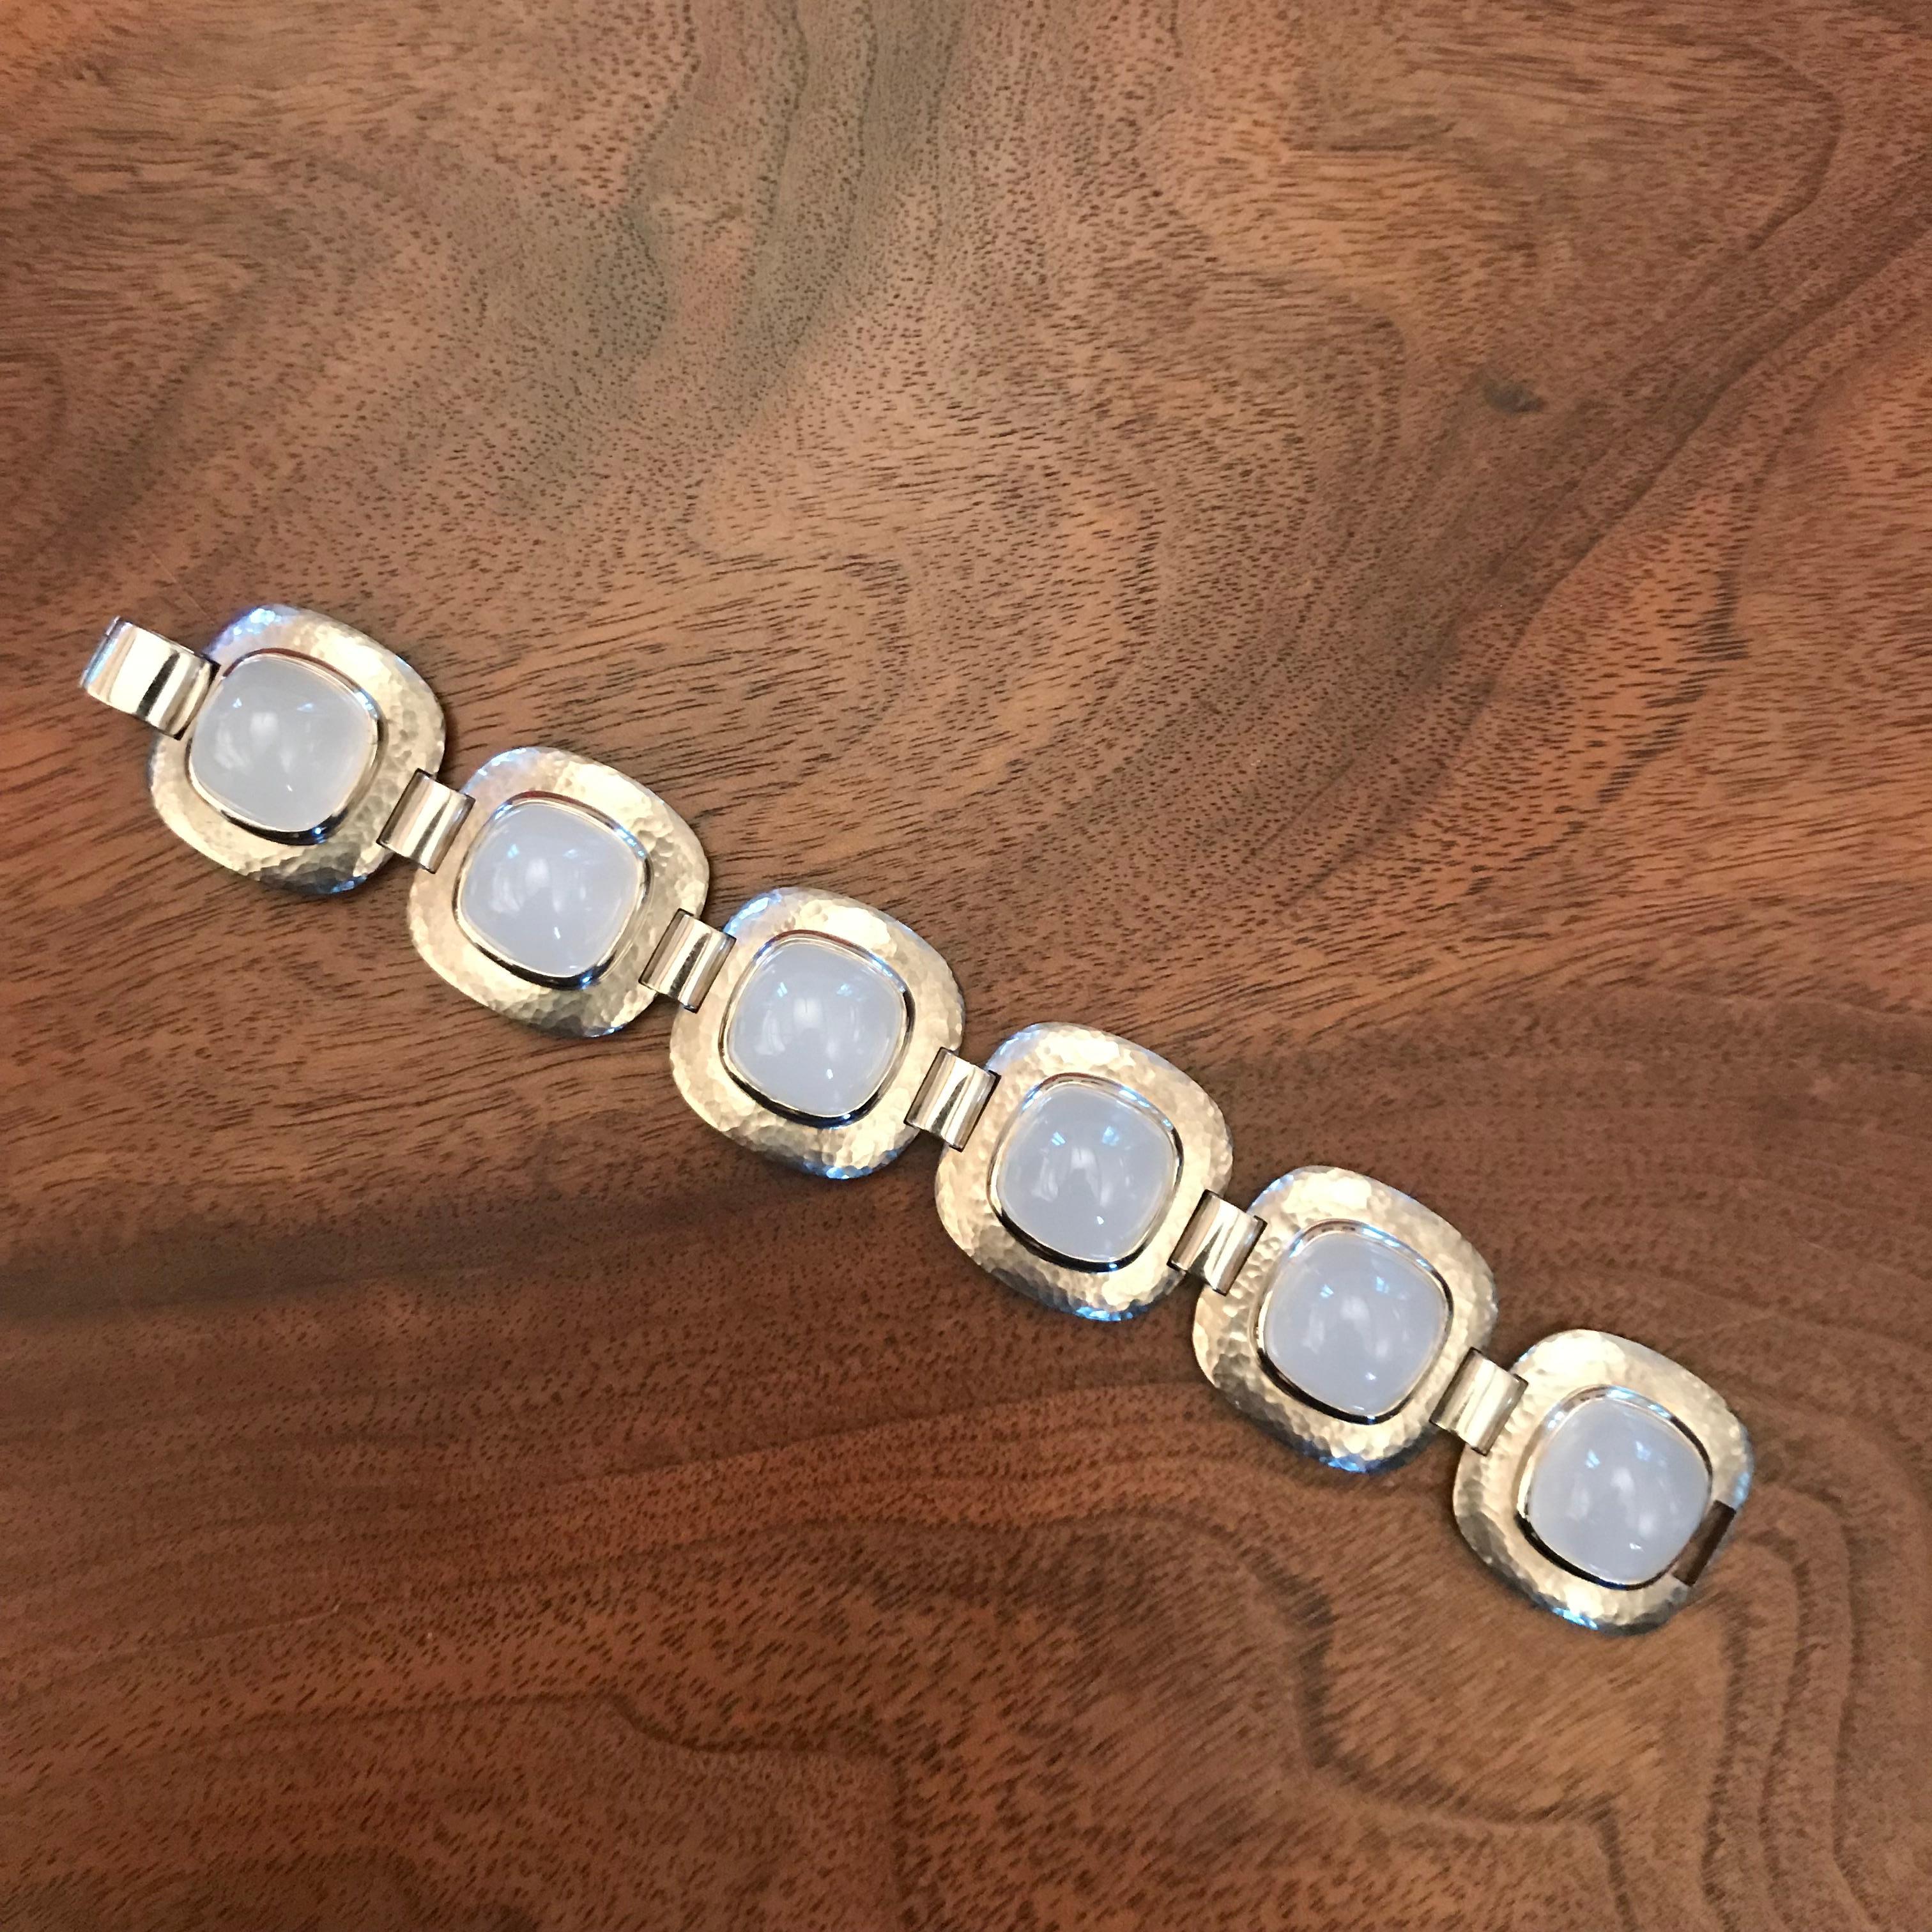 Statement bracelet in 18 carat hammered white gold with 6 milky quartz 113.1 ct in all.